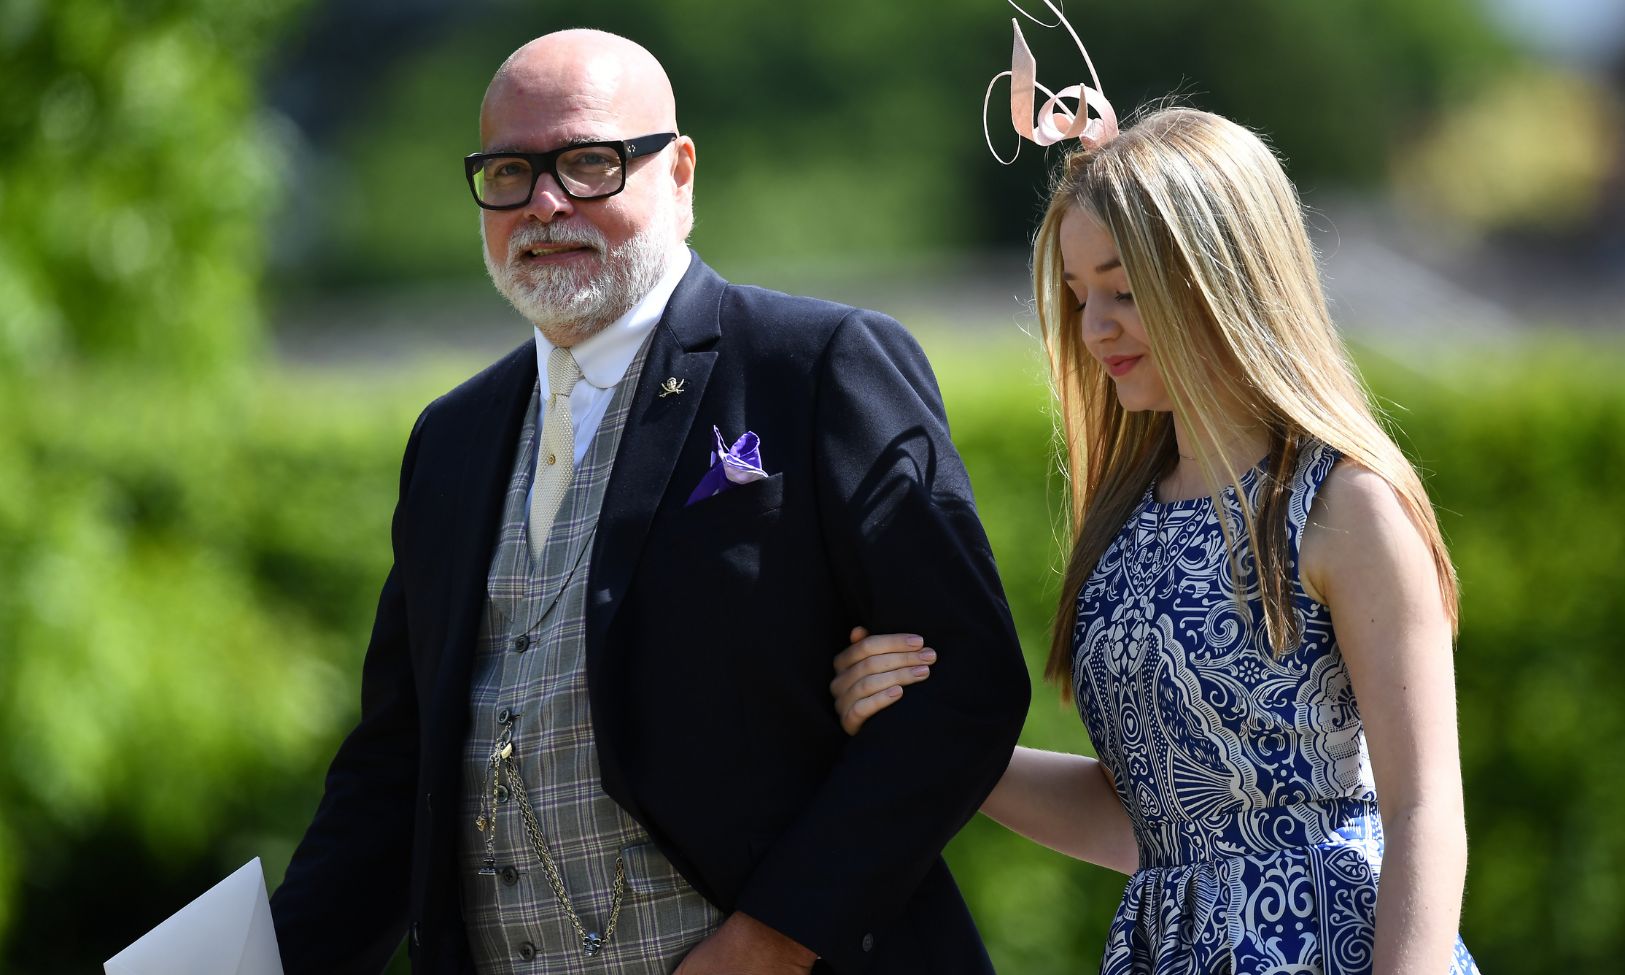 Gary Goldsmith, uncle of the bride, attends the wedding of Pippa Middleton and James Matthews at St Mark's Church in Englefield, west of London, on May 20, 2017. REUTERS/Justin Tallis/Pool/File Photo